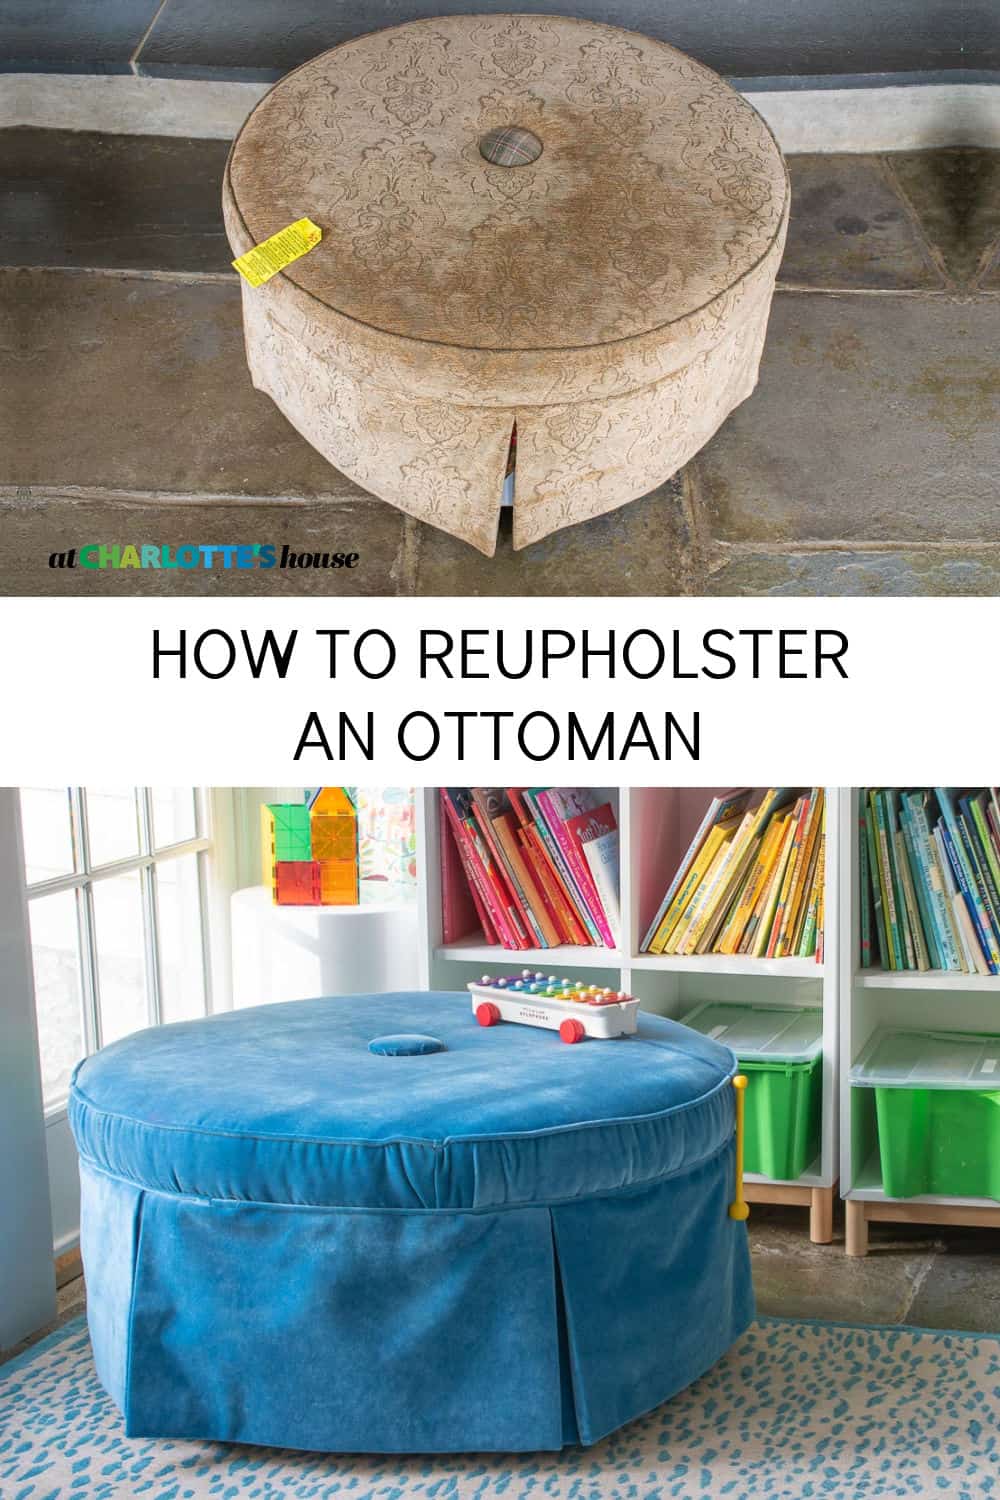 How To Reupholster An Ottoman At, How To Reupholster A Round Ottoman